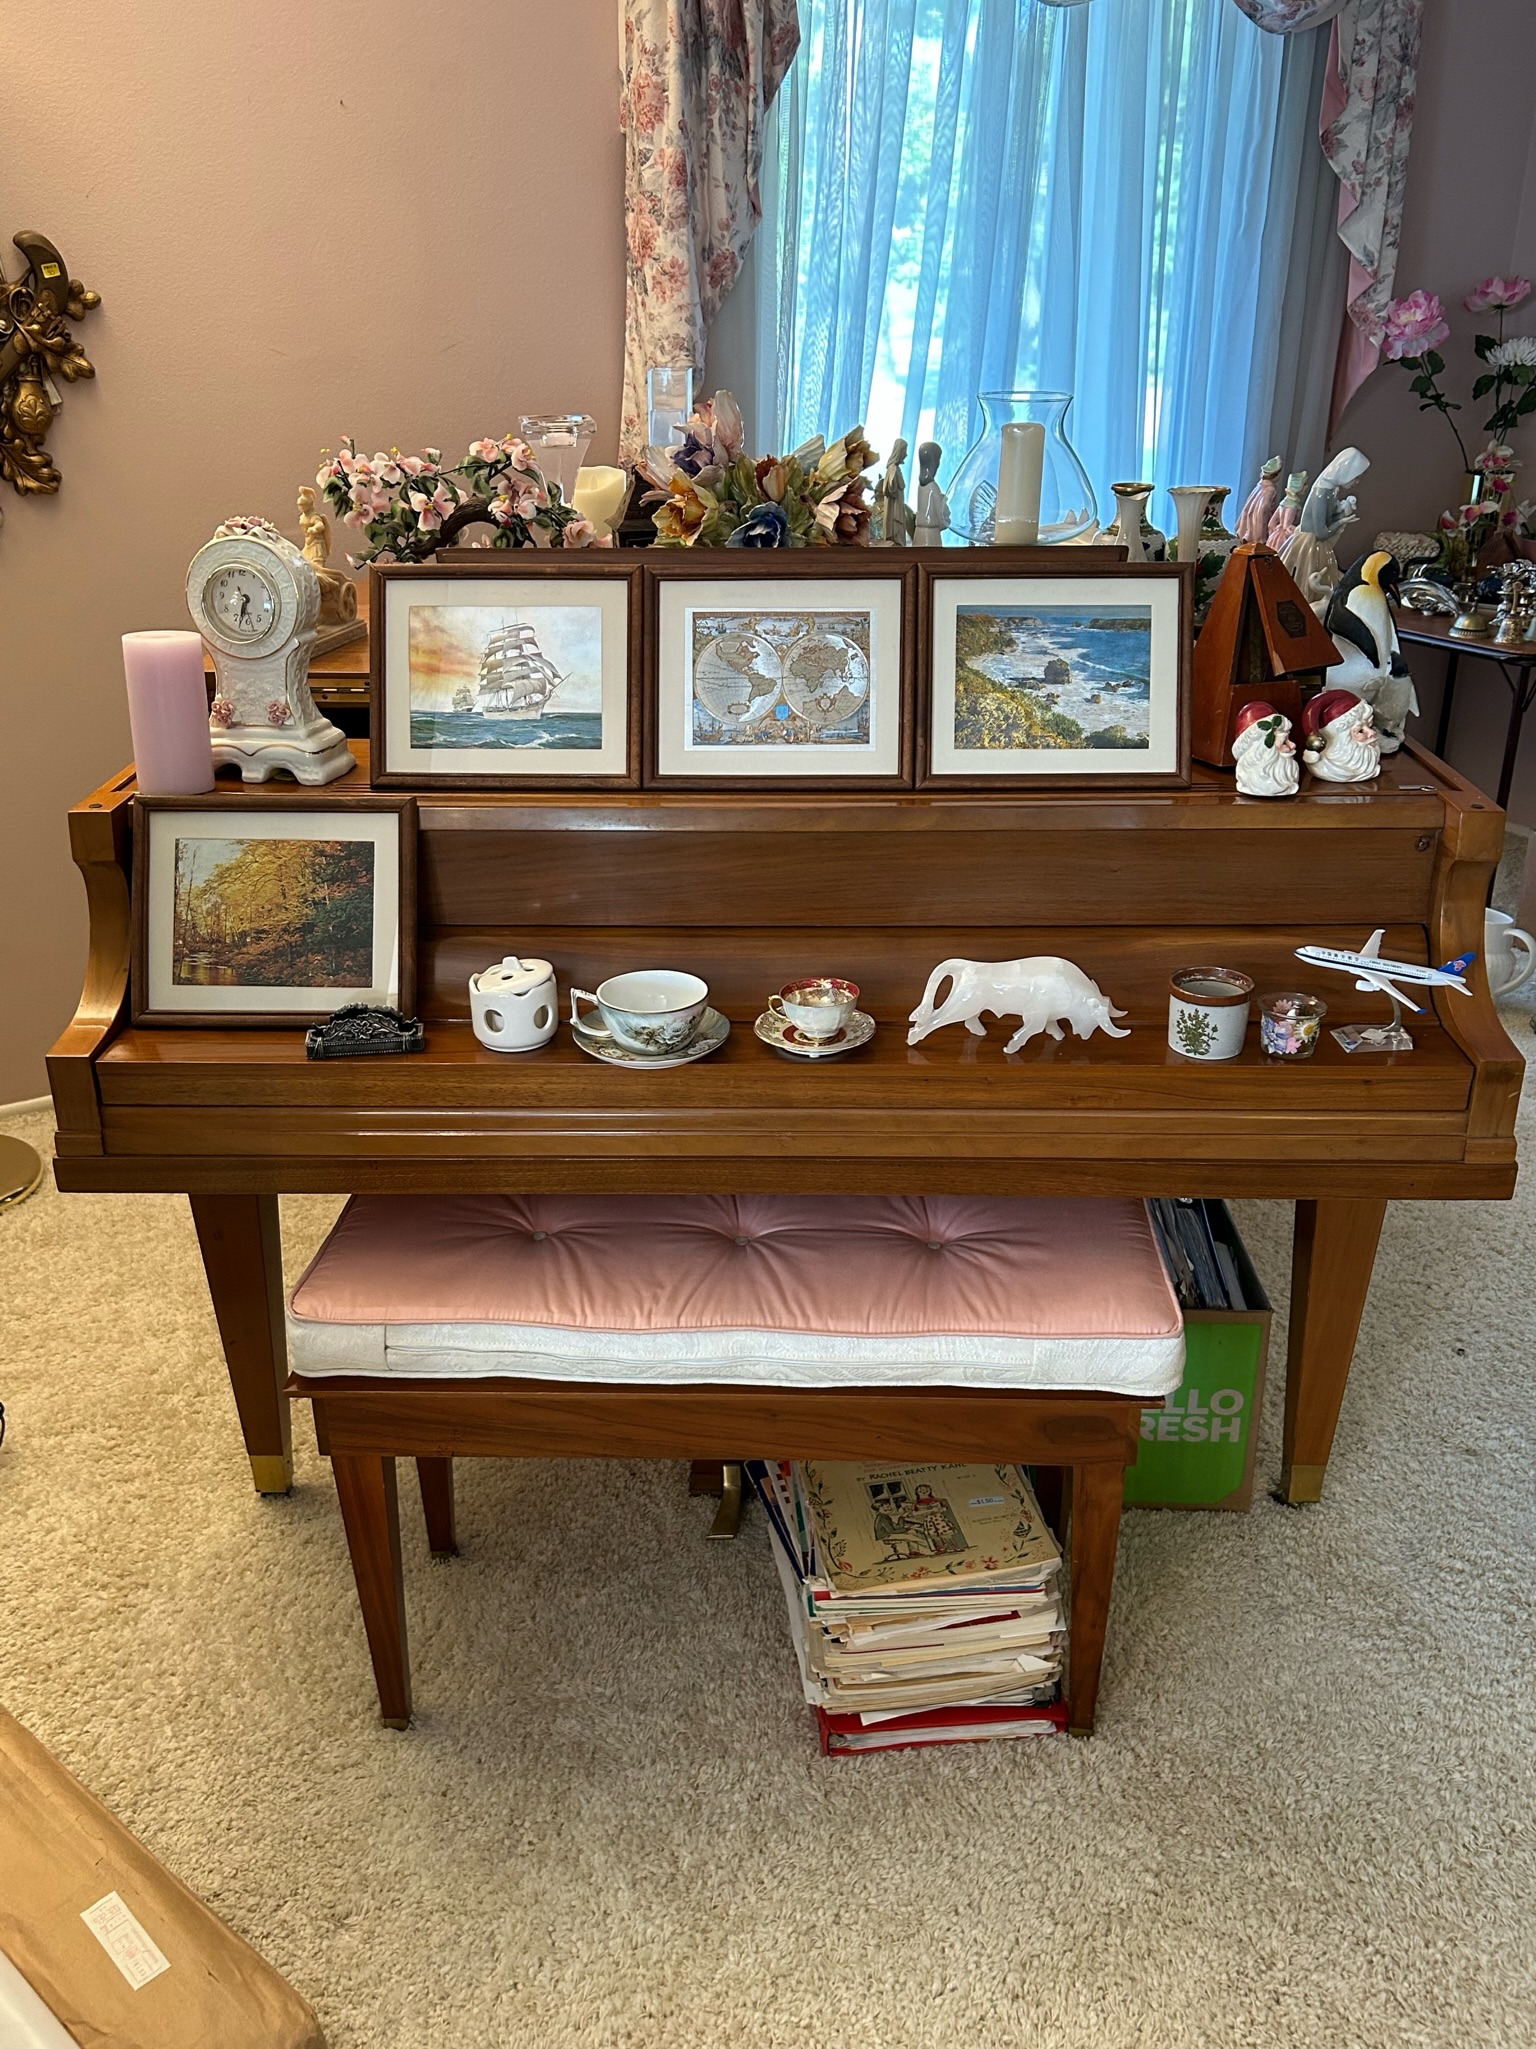 A wooden baby grand piano is displayed with numerous paintings and decor pieces.